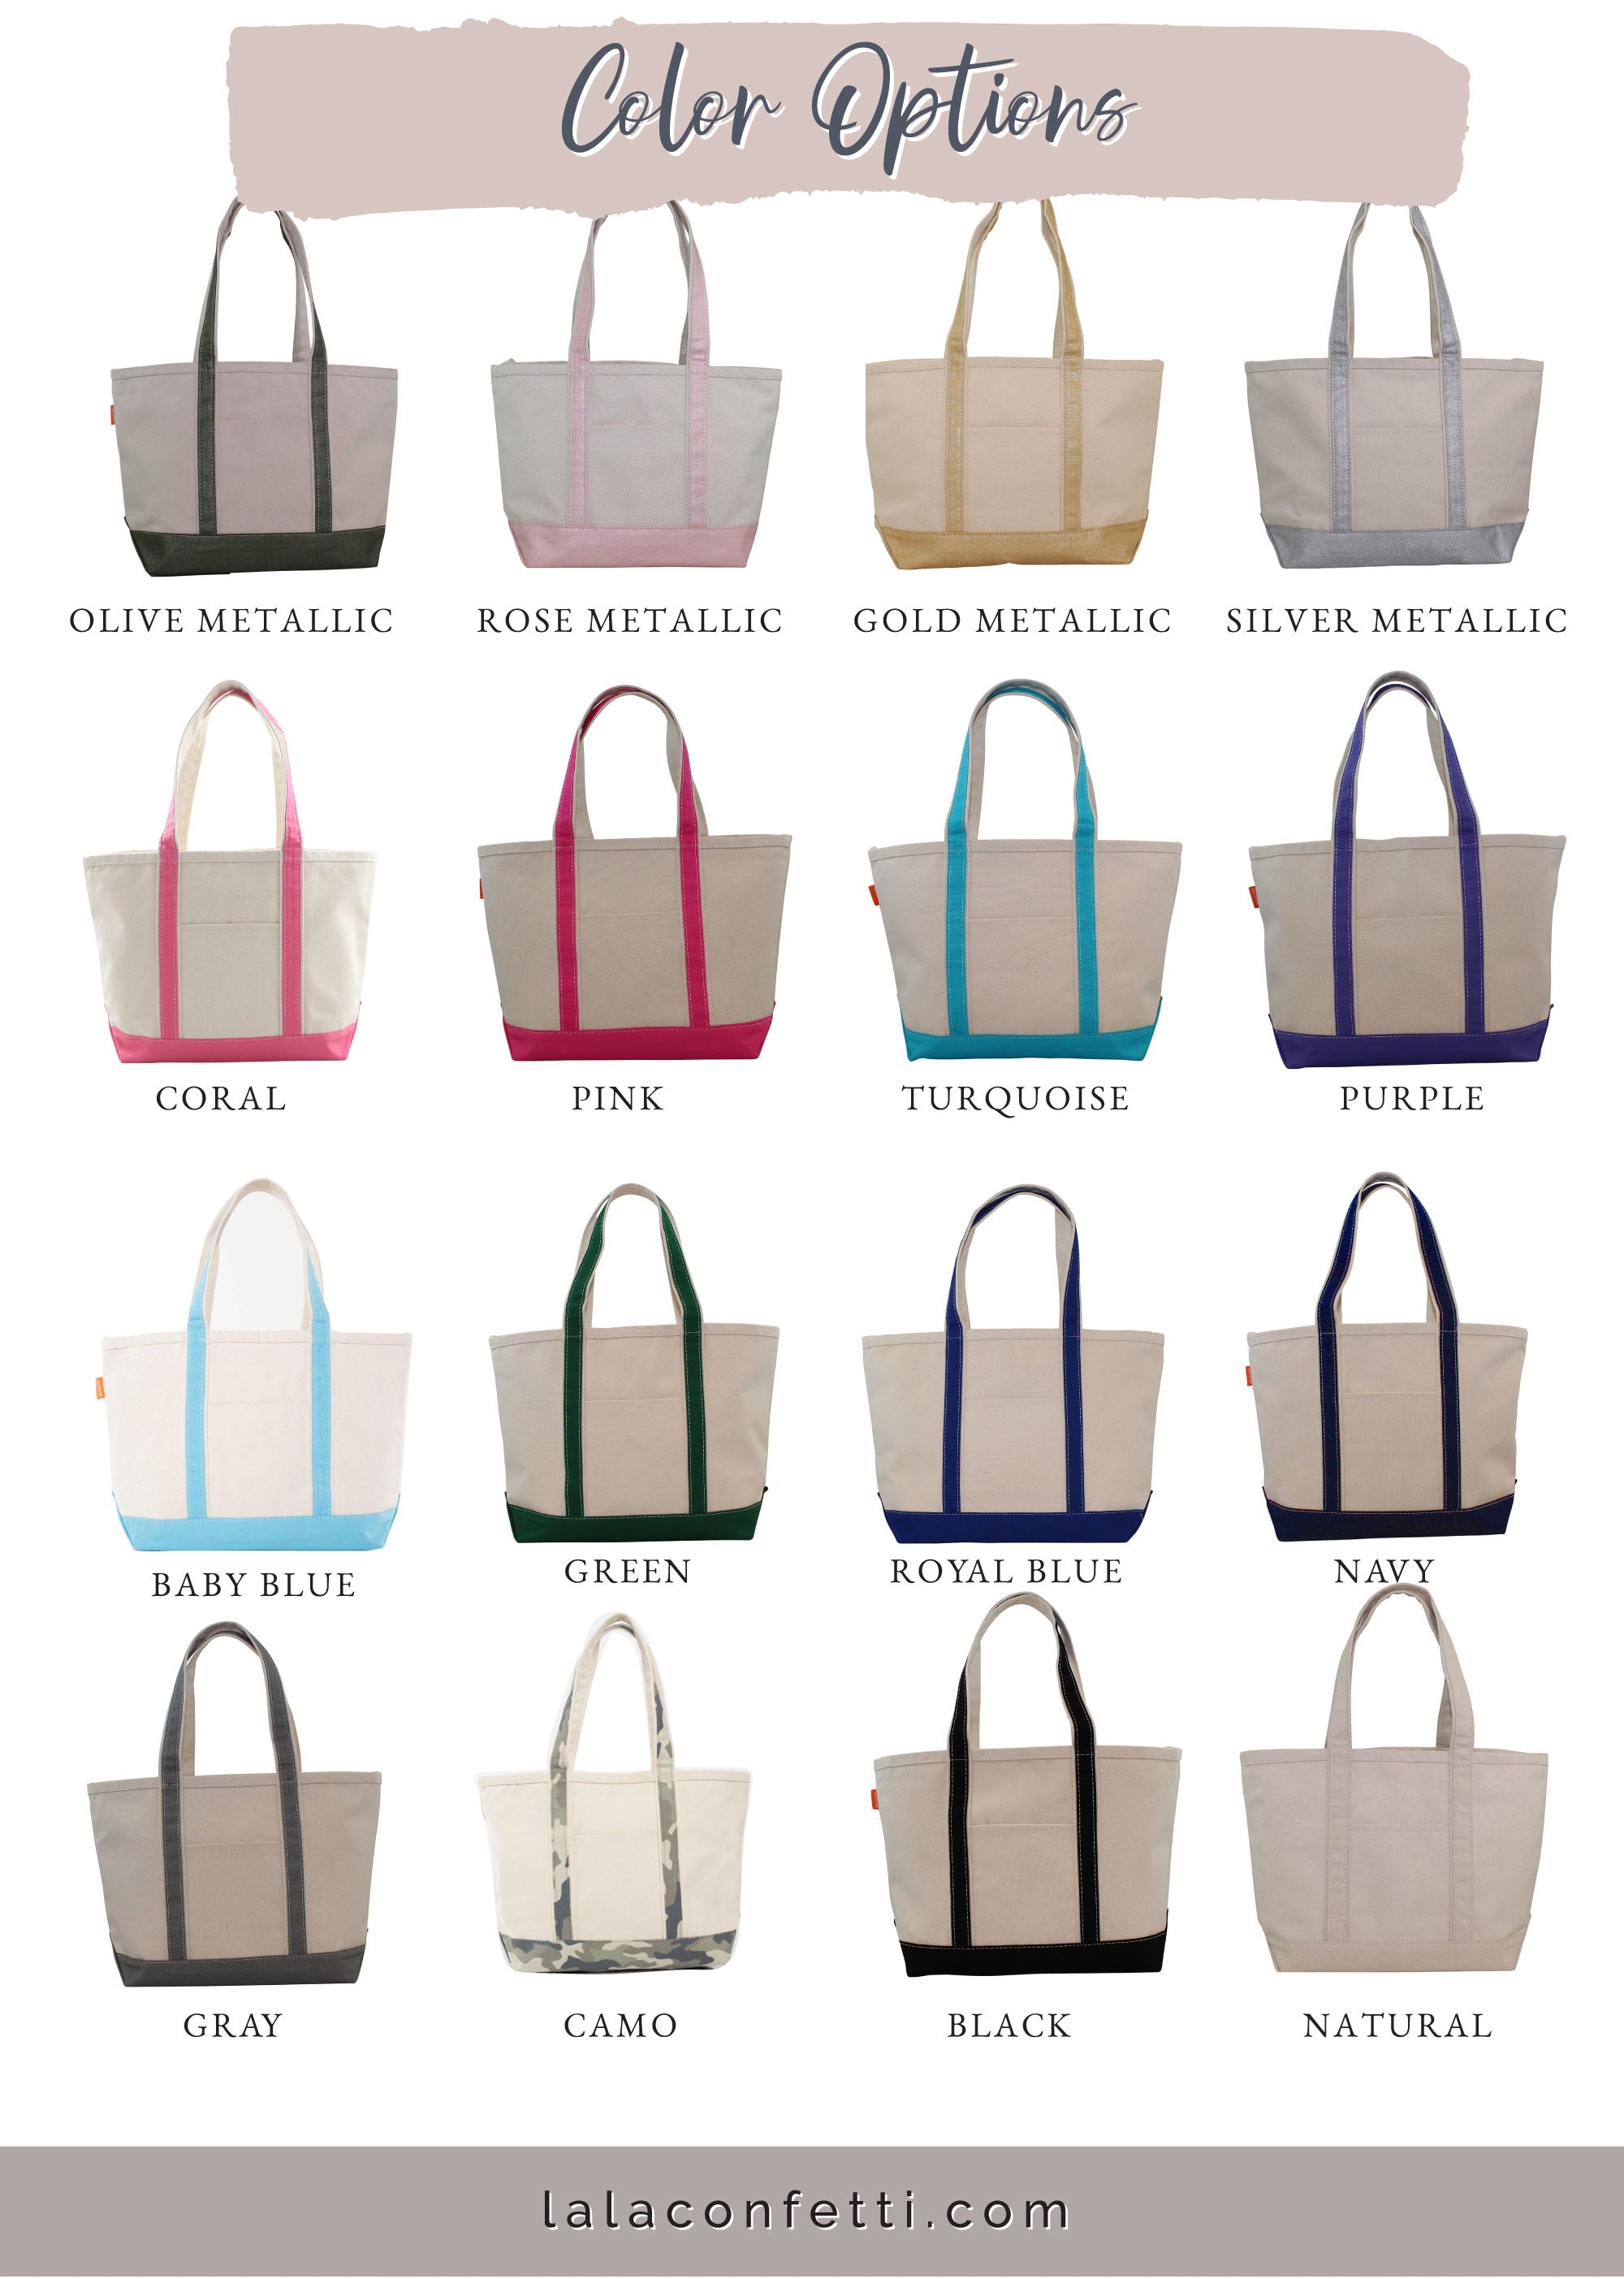 Medium Personalized Boat Tote Lots of Colors